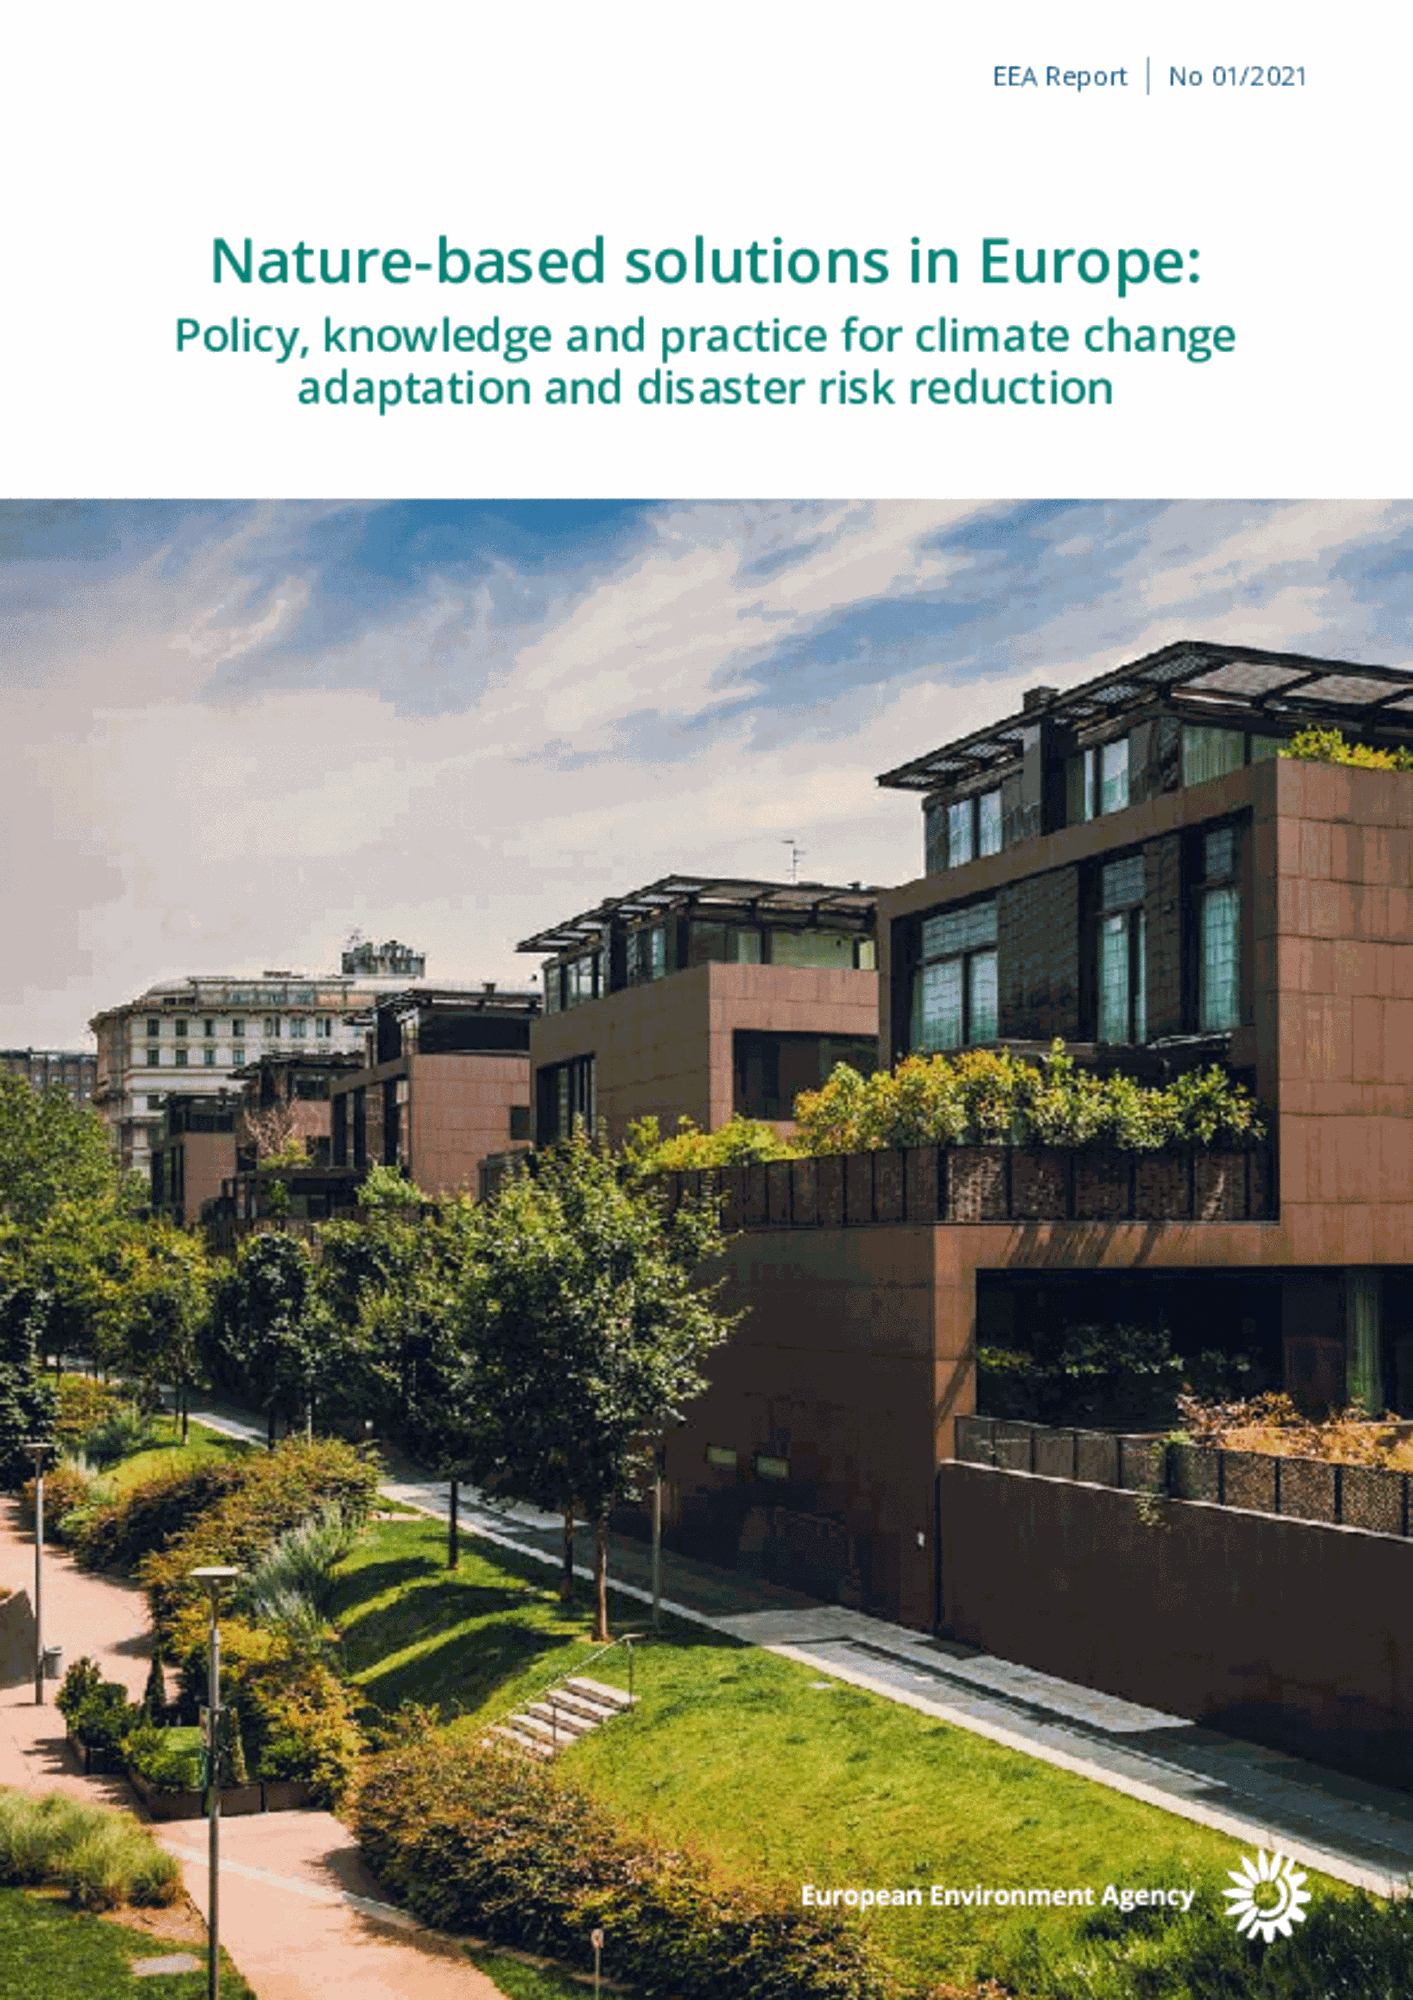 Nature-based solutions in Europe: Policy, knowledge and practice for climate adaptation and disaster risk reduction — European Environment Agency